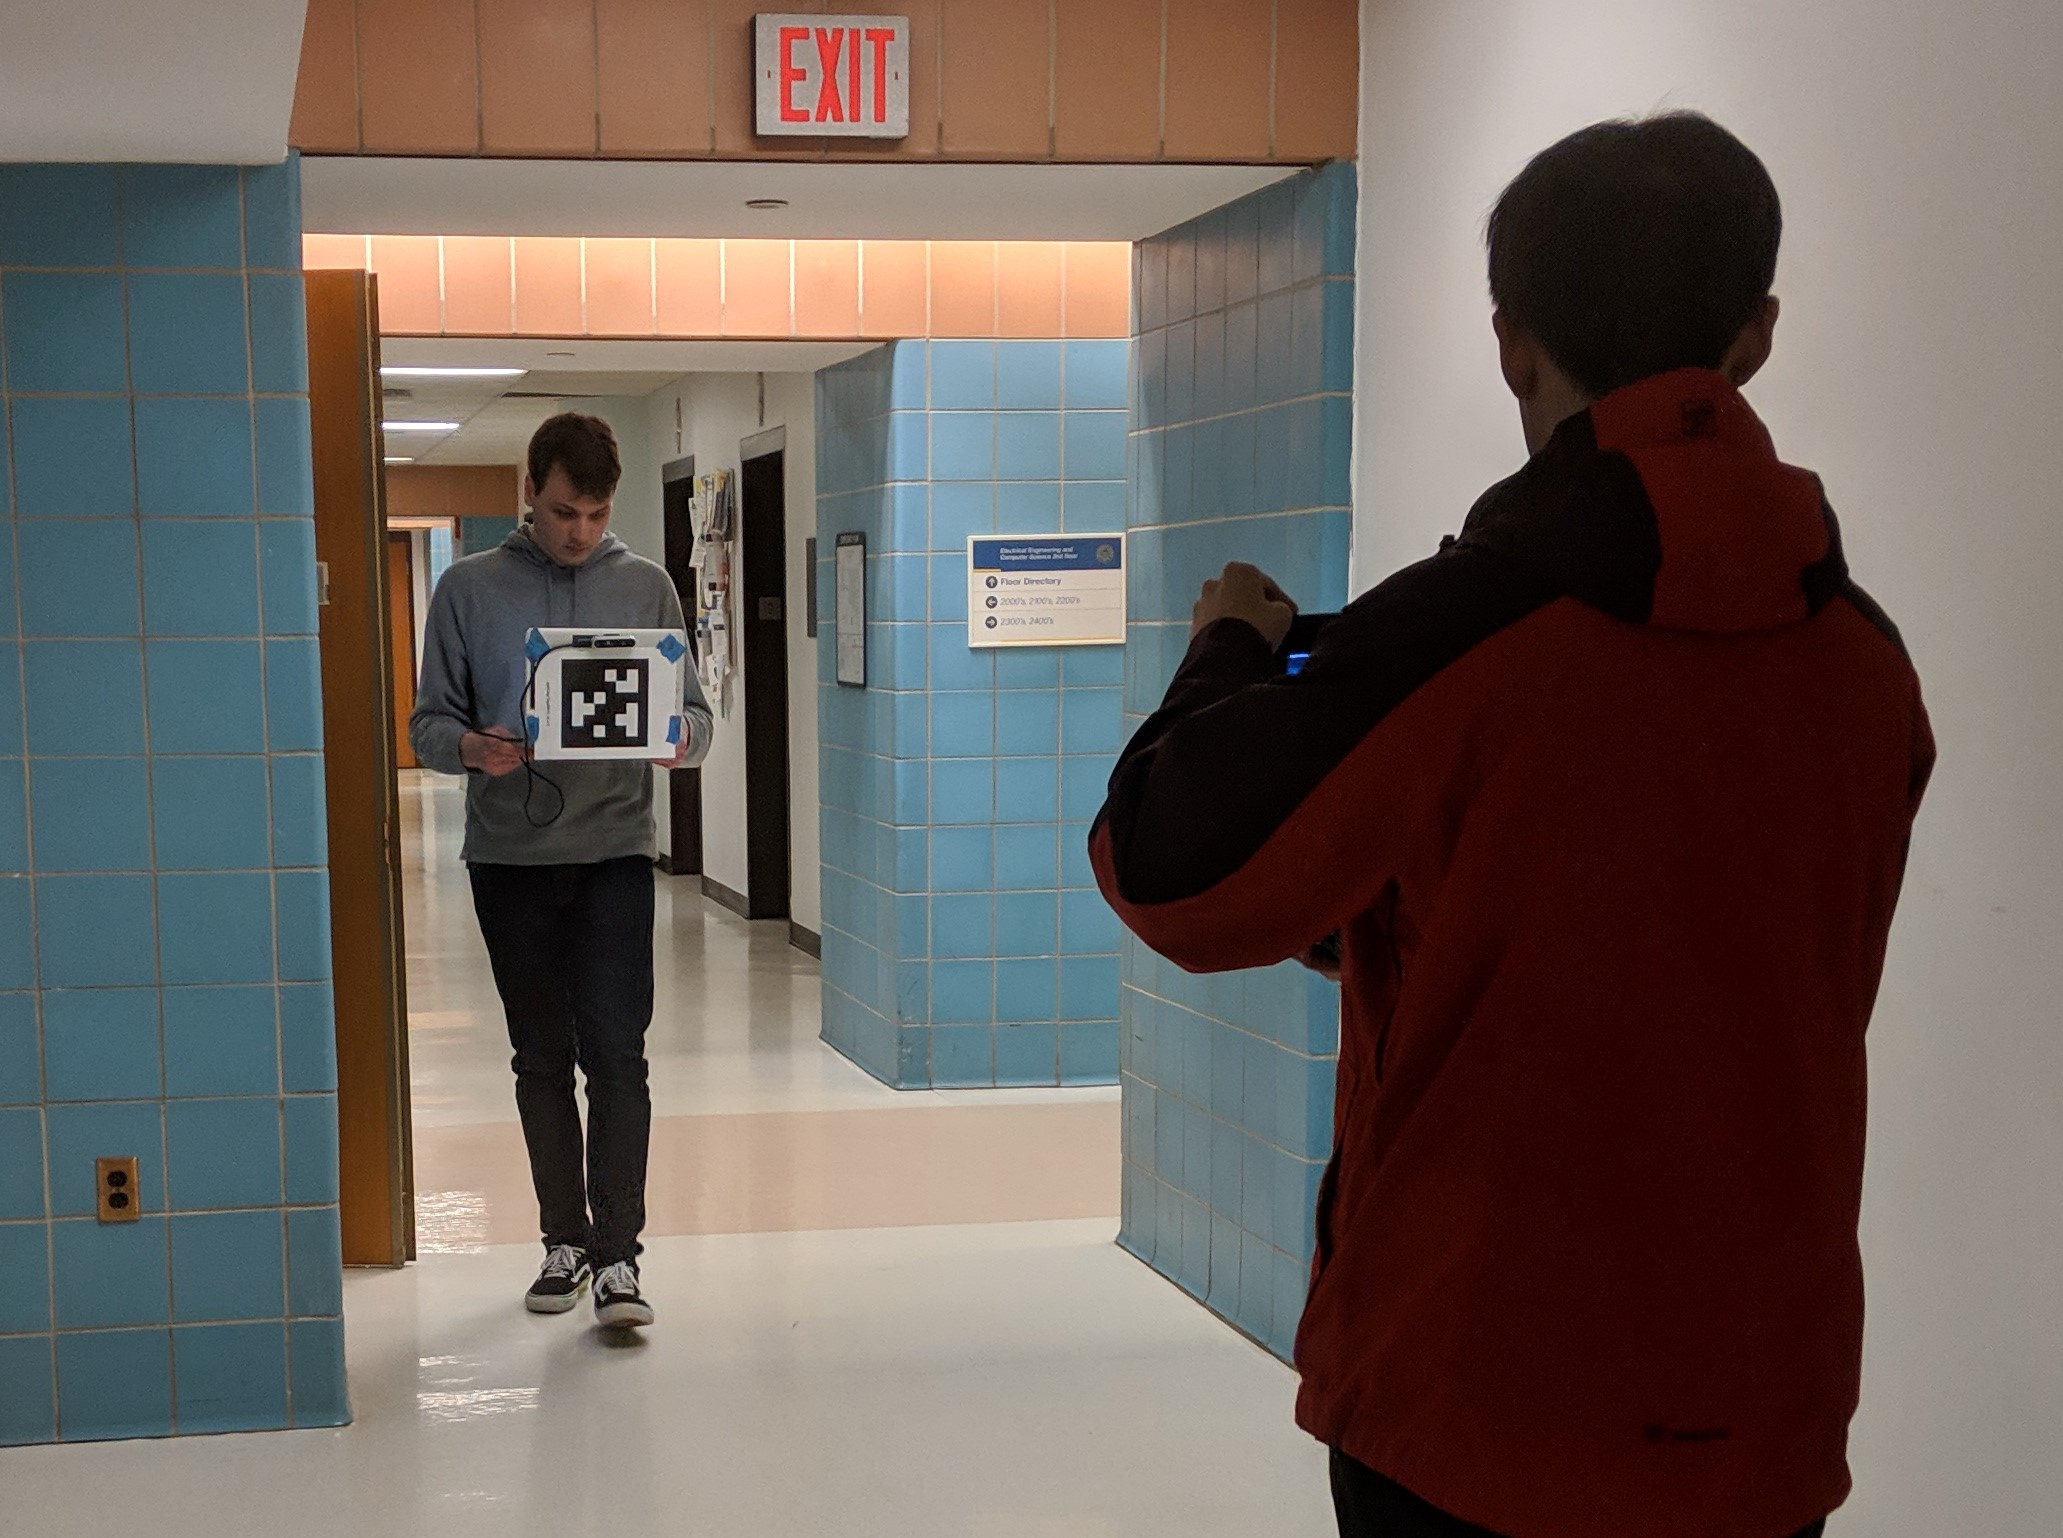 three men stand in a hallway.  Two are facing each other holding open laptops with April tags taped to the lids